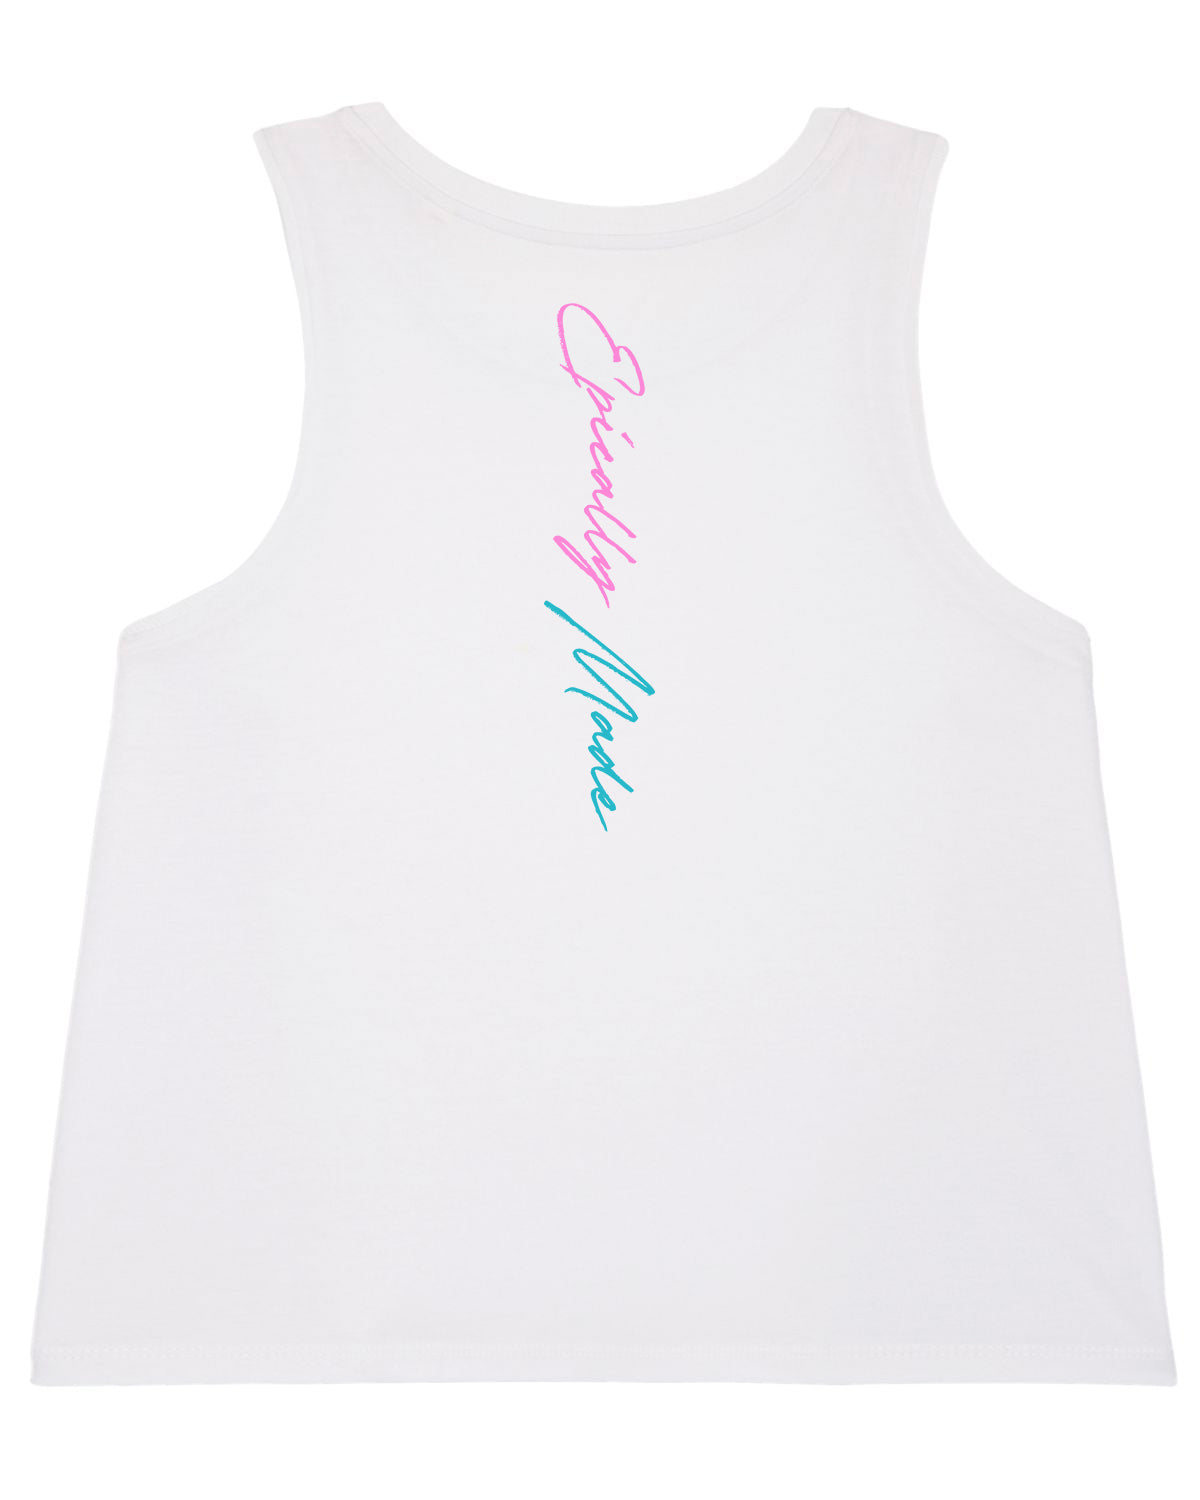 Women's Cropped "Retro Collection" Tank Top